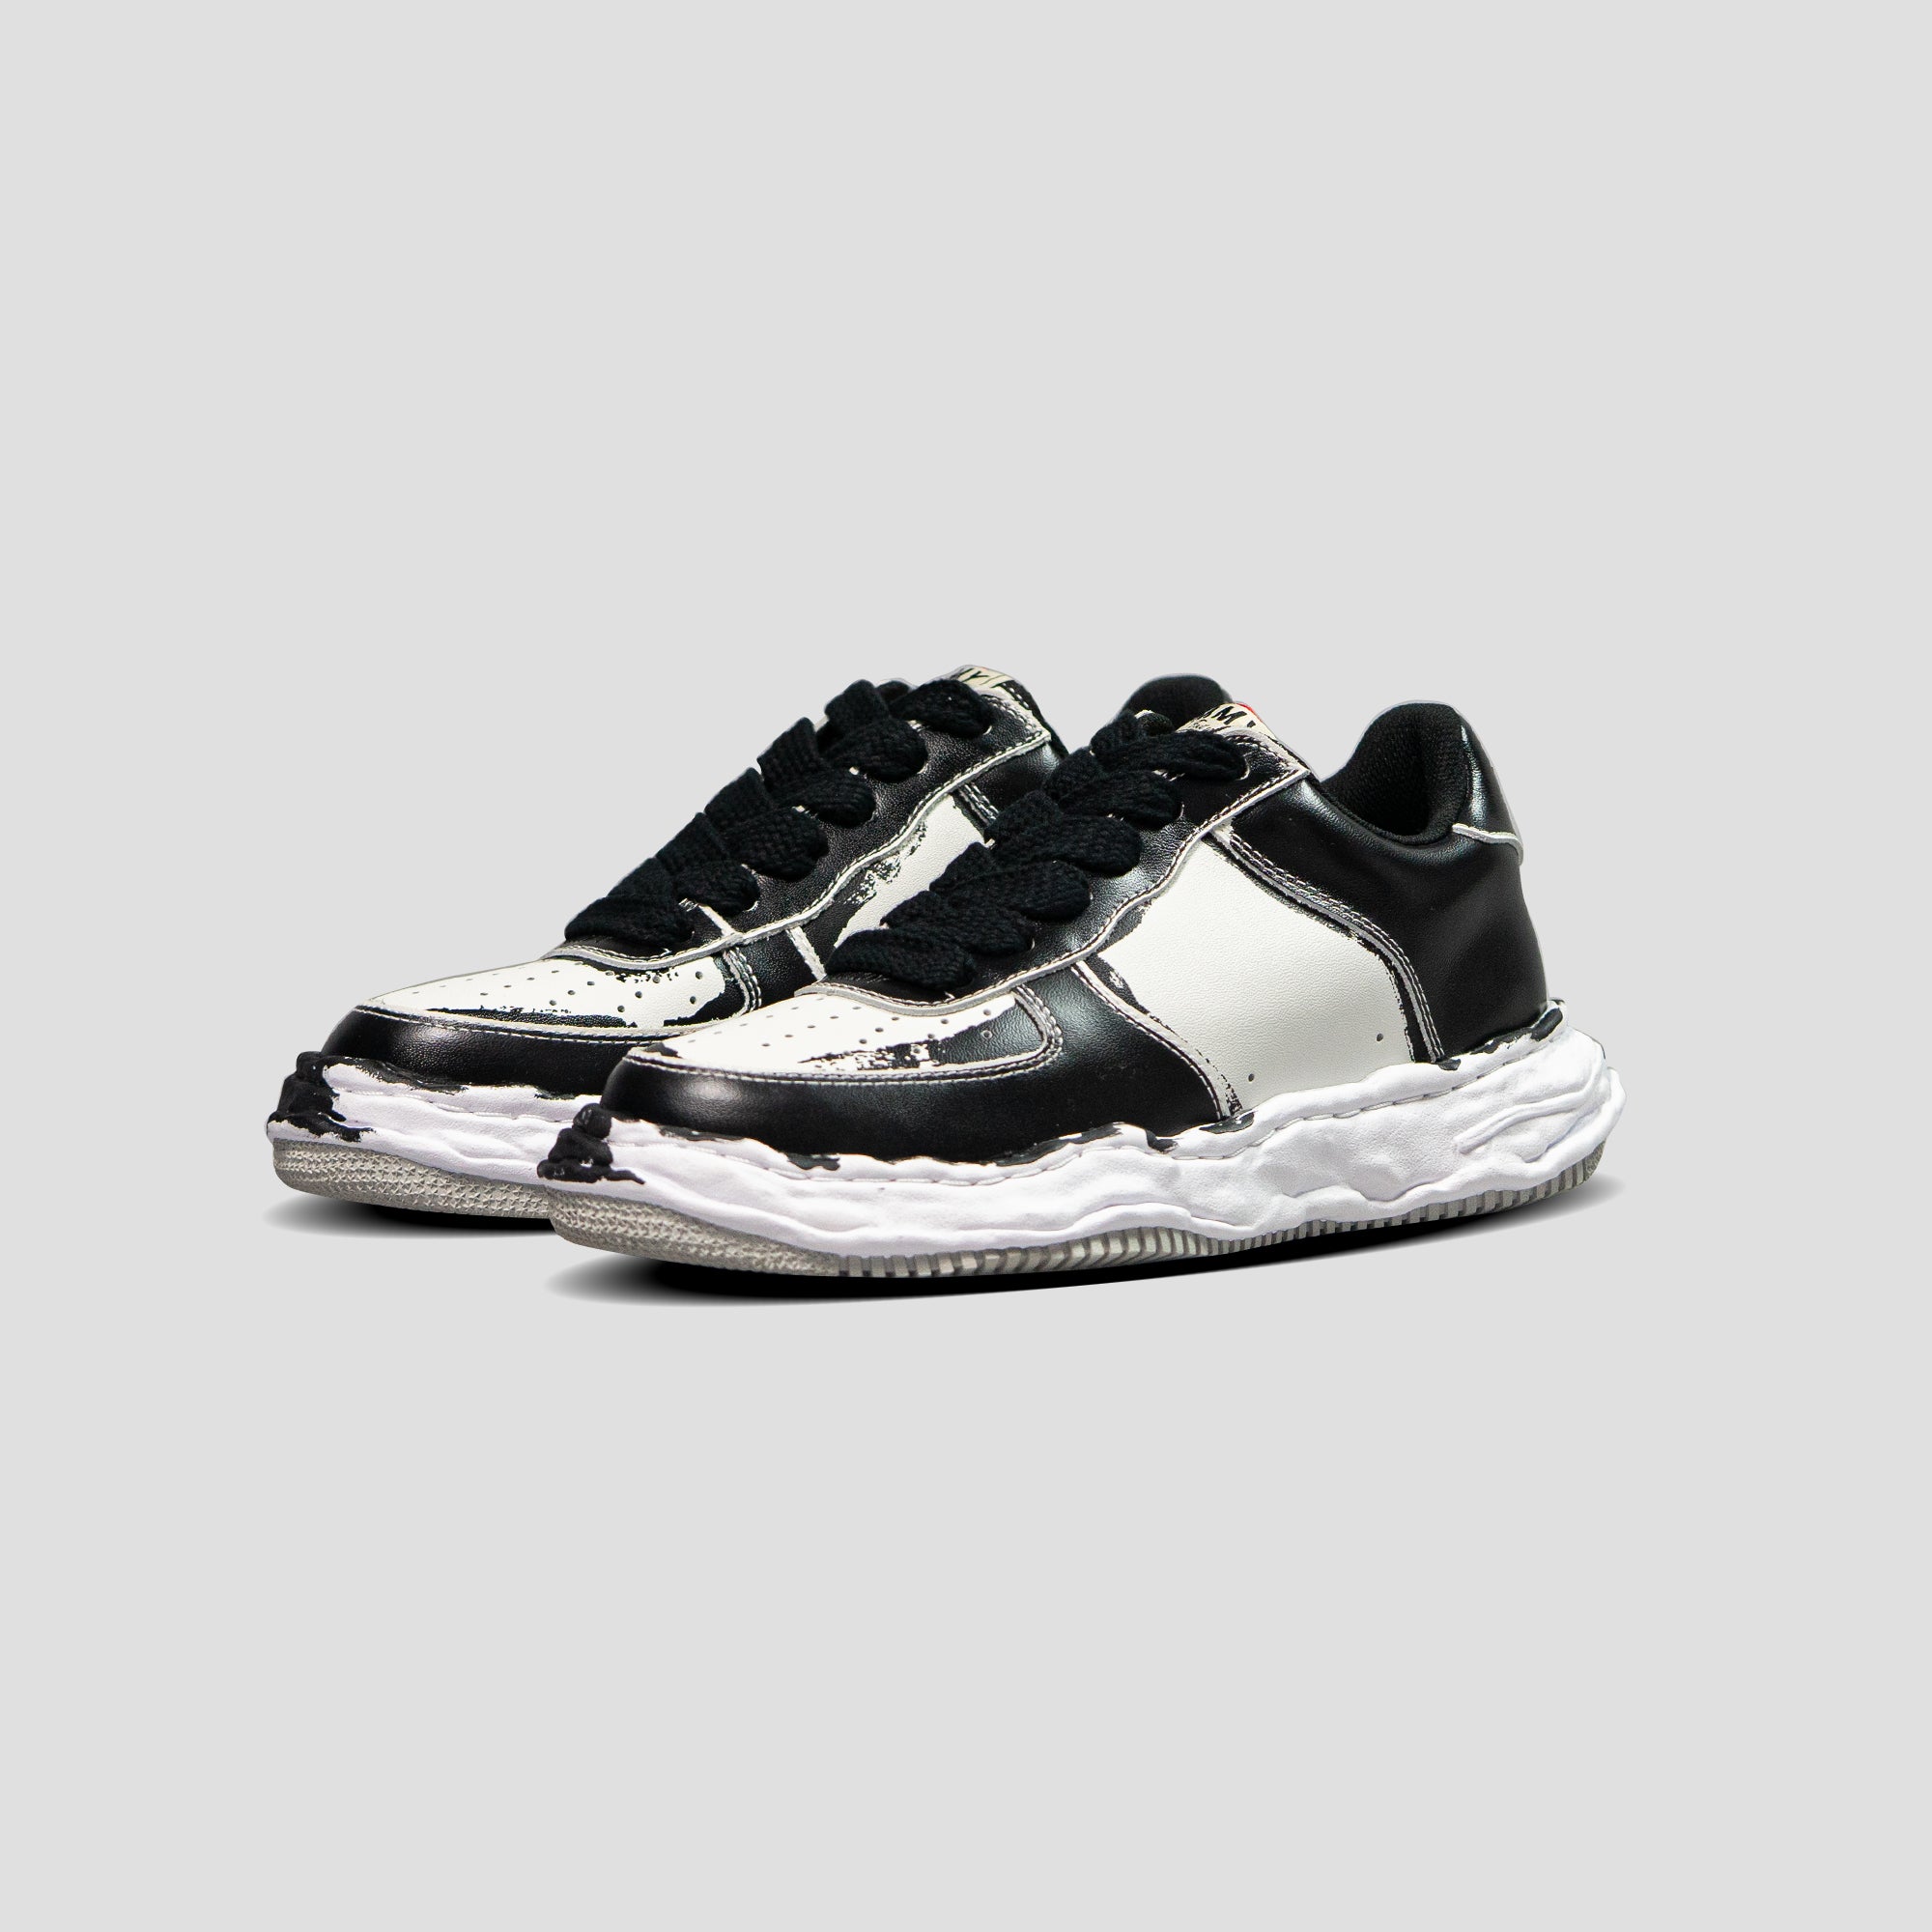 WAYNE OG SOLE LOW-TOP PAINTED LEATHER SNEAKERS